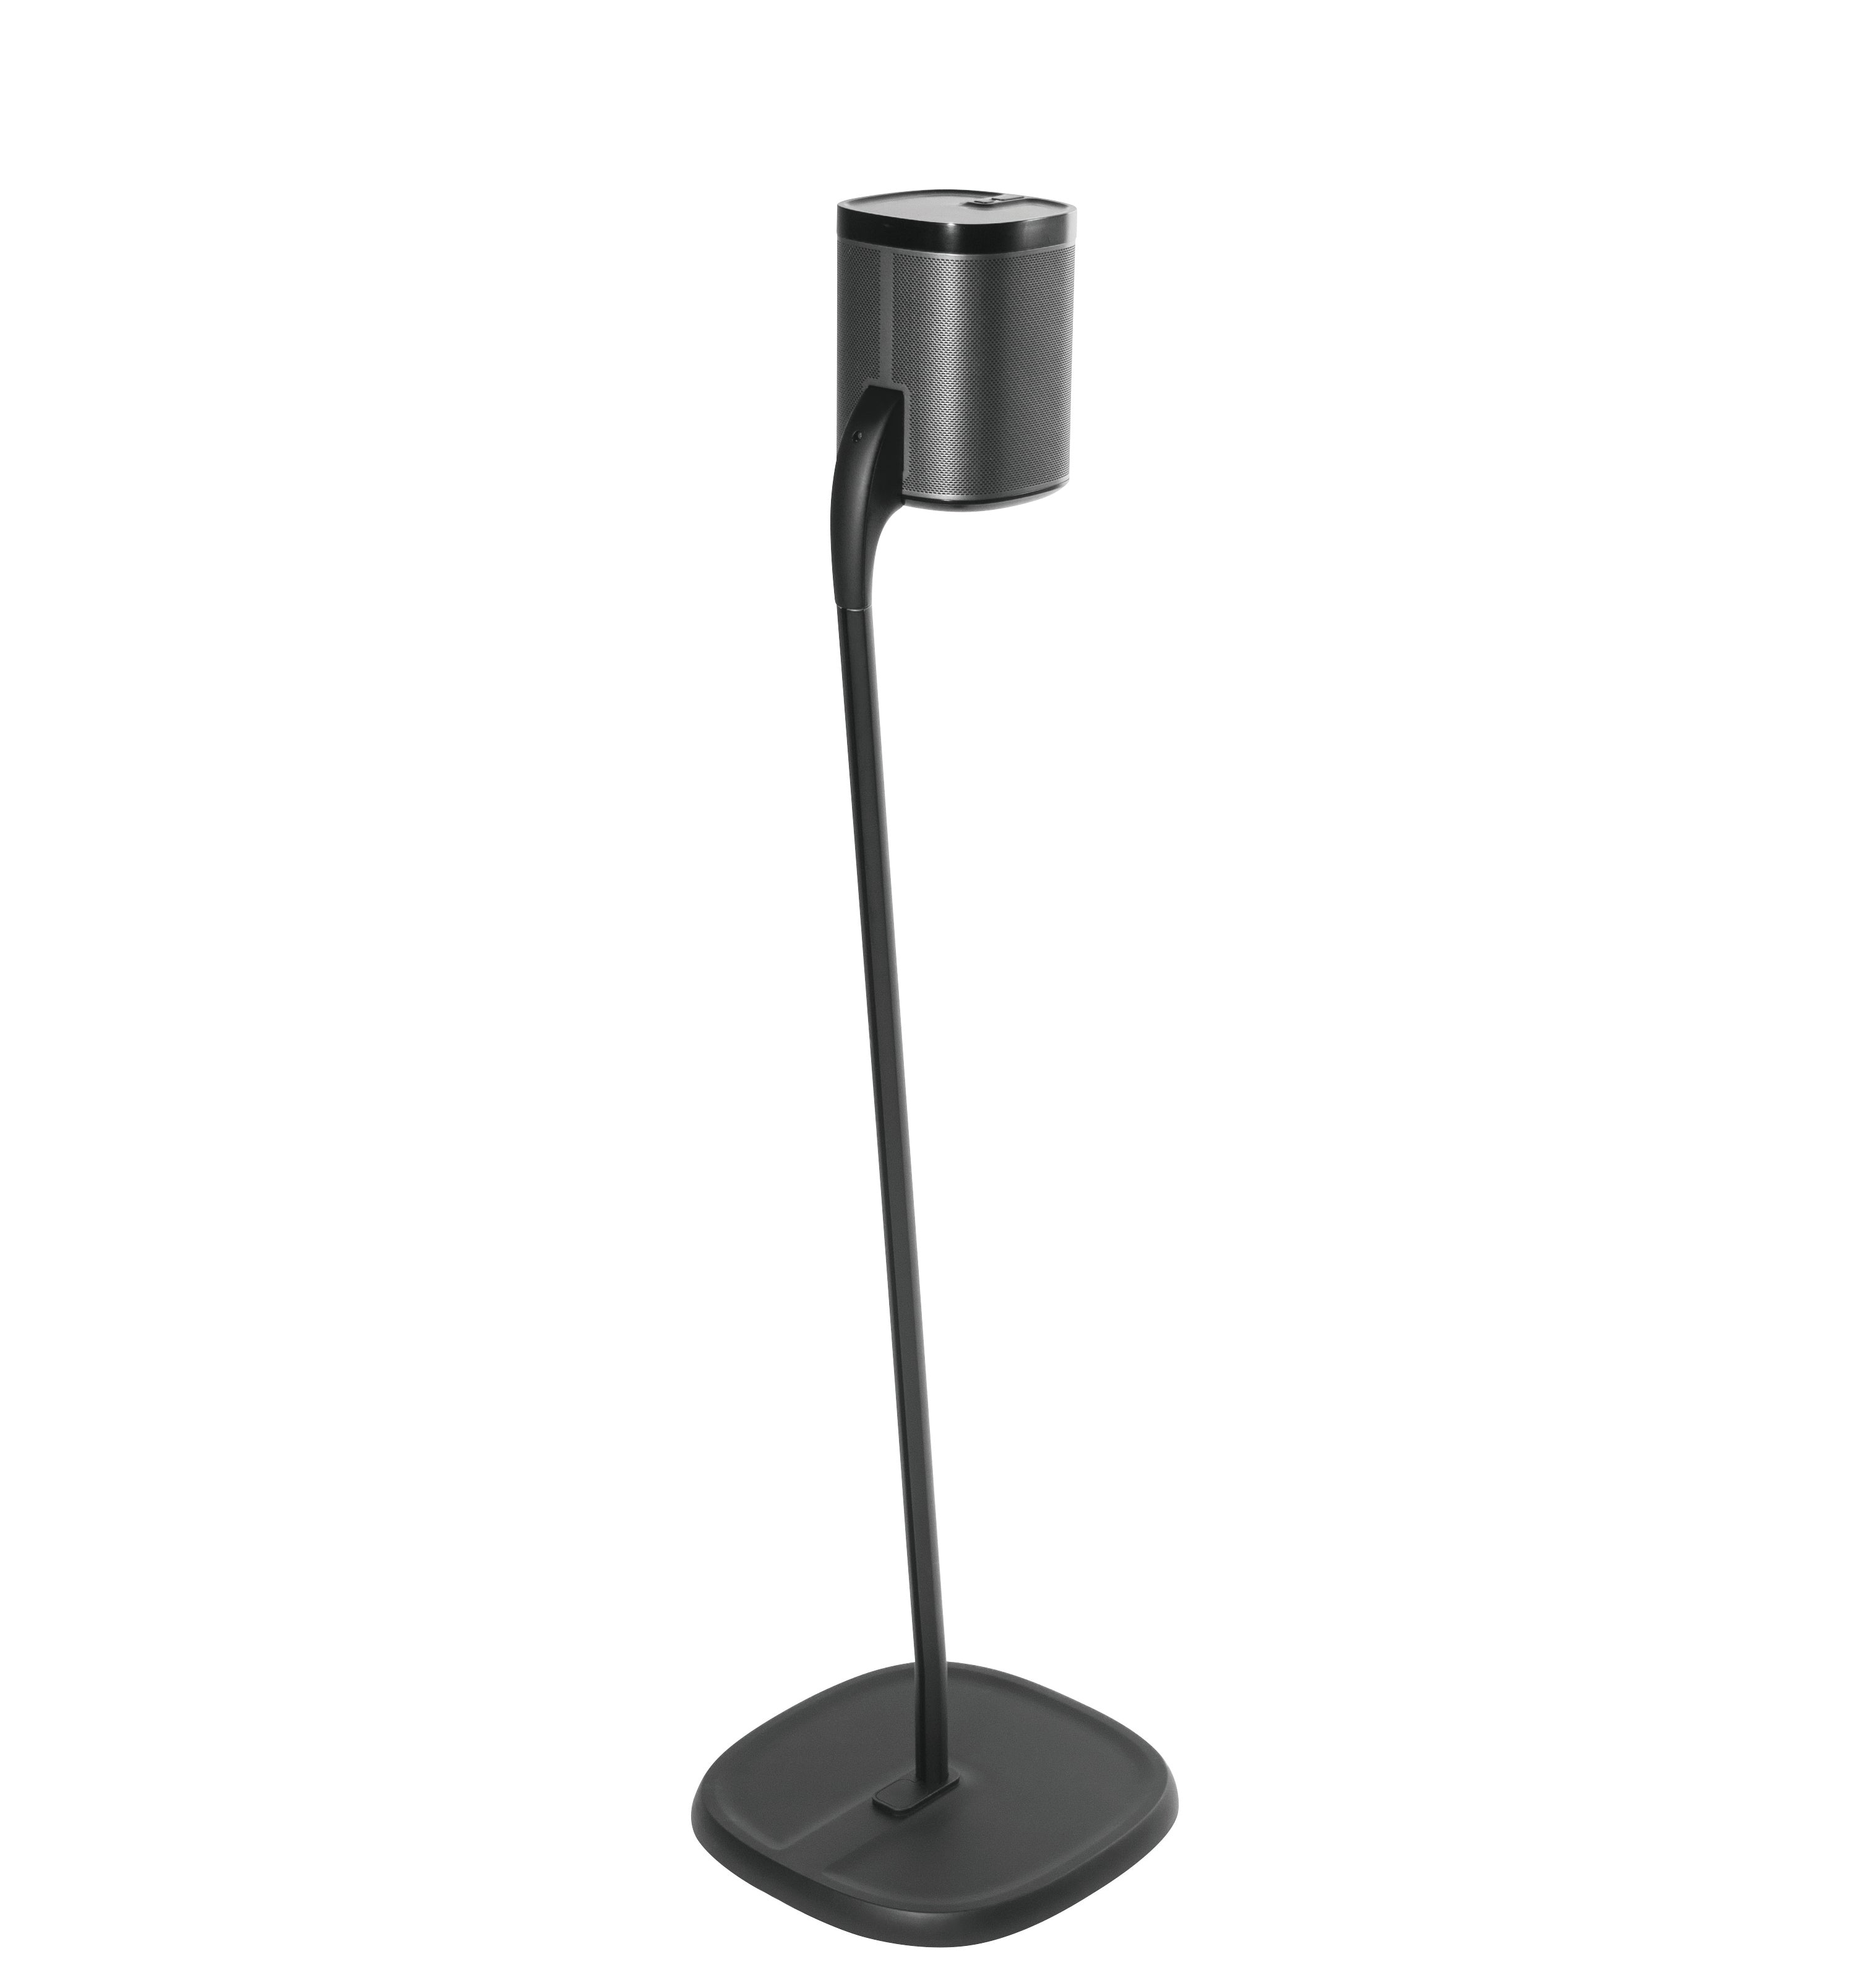 GT STUDIO STAND:1 Speaker Stand for SONOS PLAY:1 - BLACK SINGLE